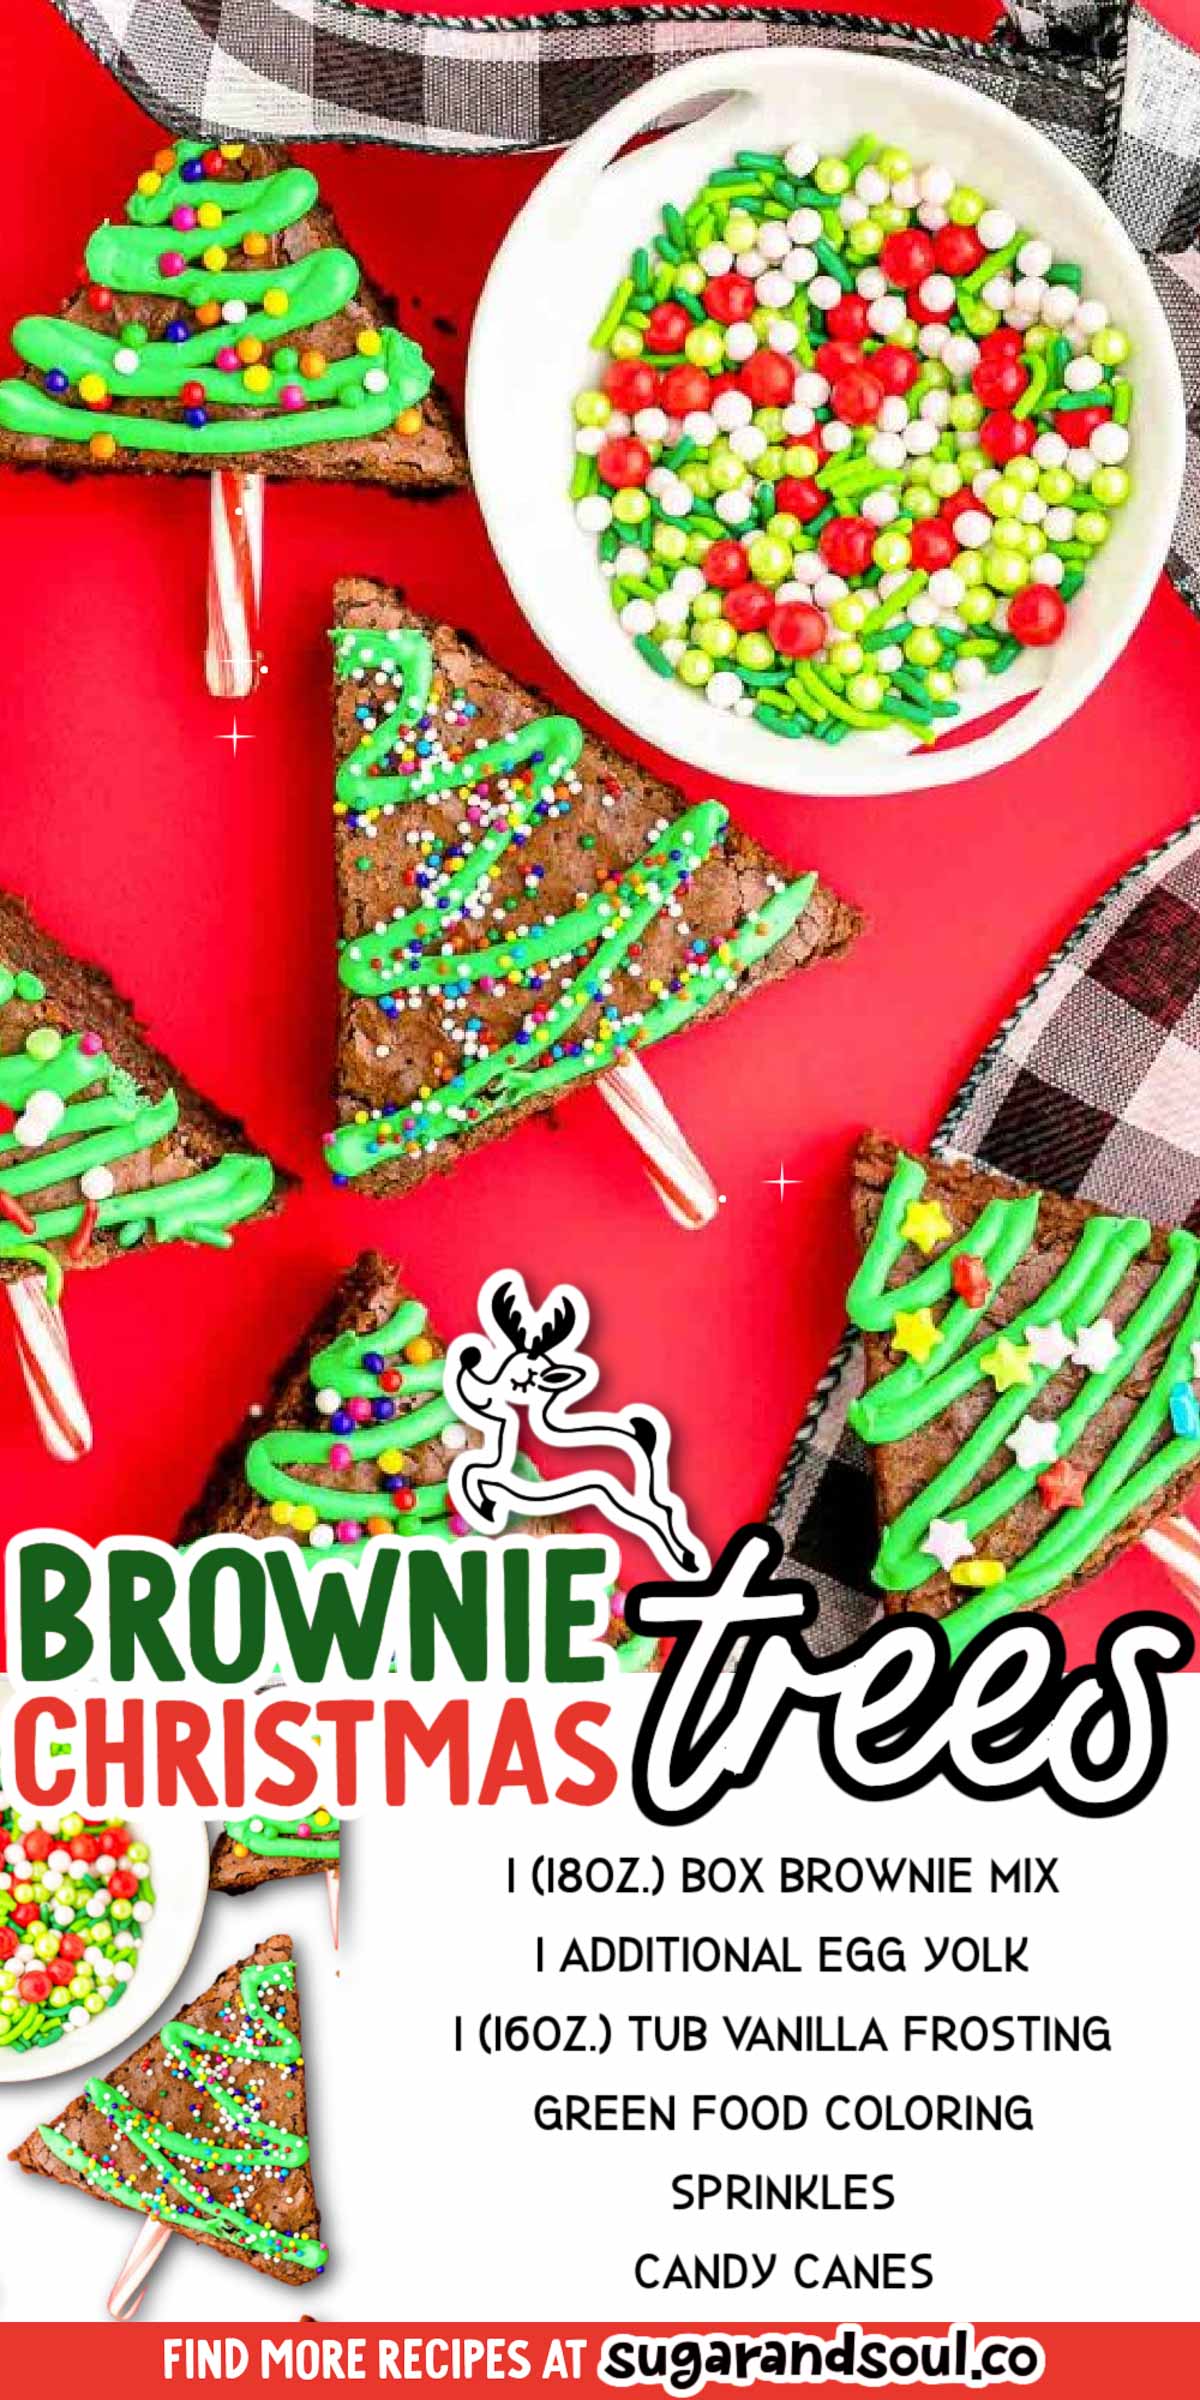 Brownie Christmas Trees are an easy holiday treat to whip up using a boxed brownie mix, a premade jar of frosting, sprinkles, and candy canes! Prep this dessert in just 20 minutes! via @sugarandsoulco